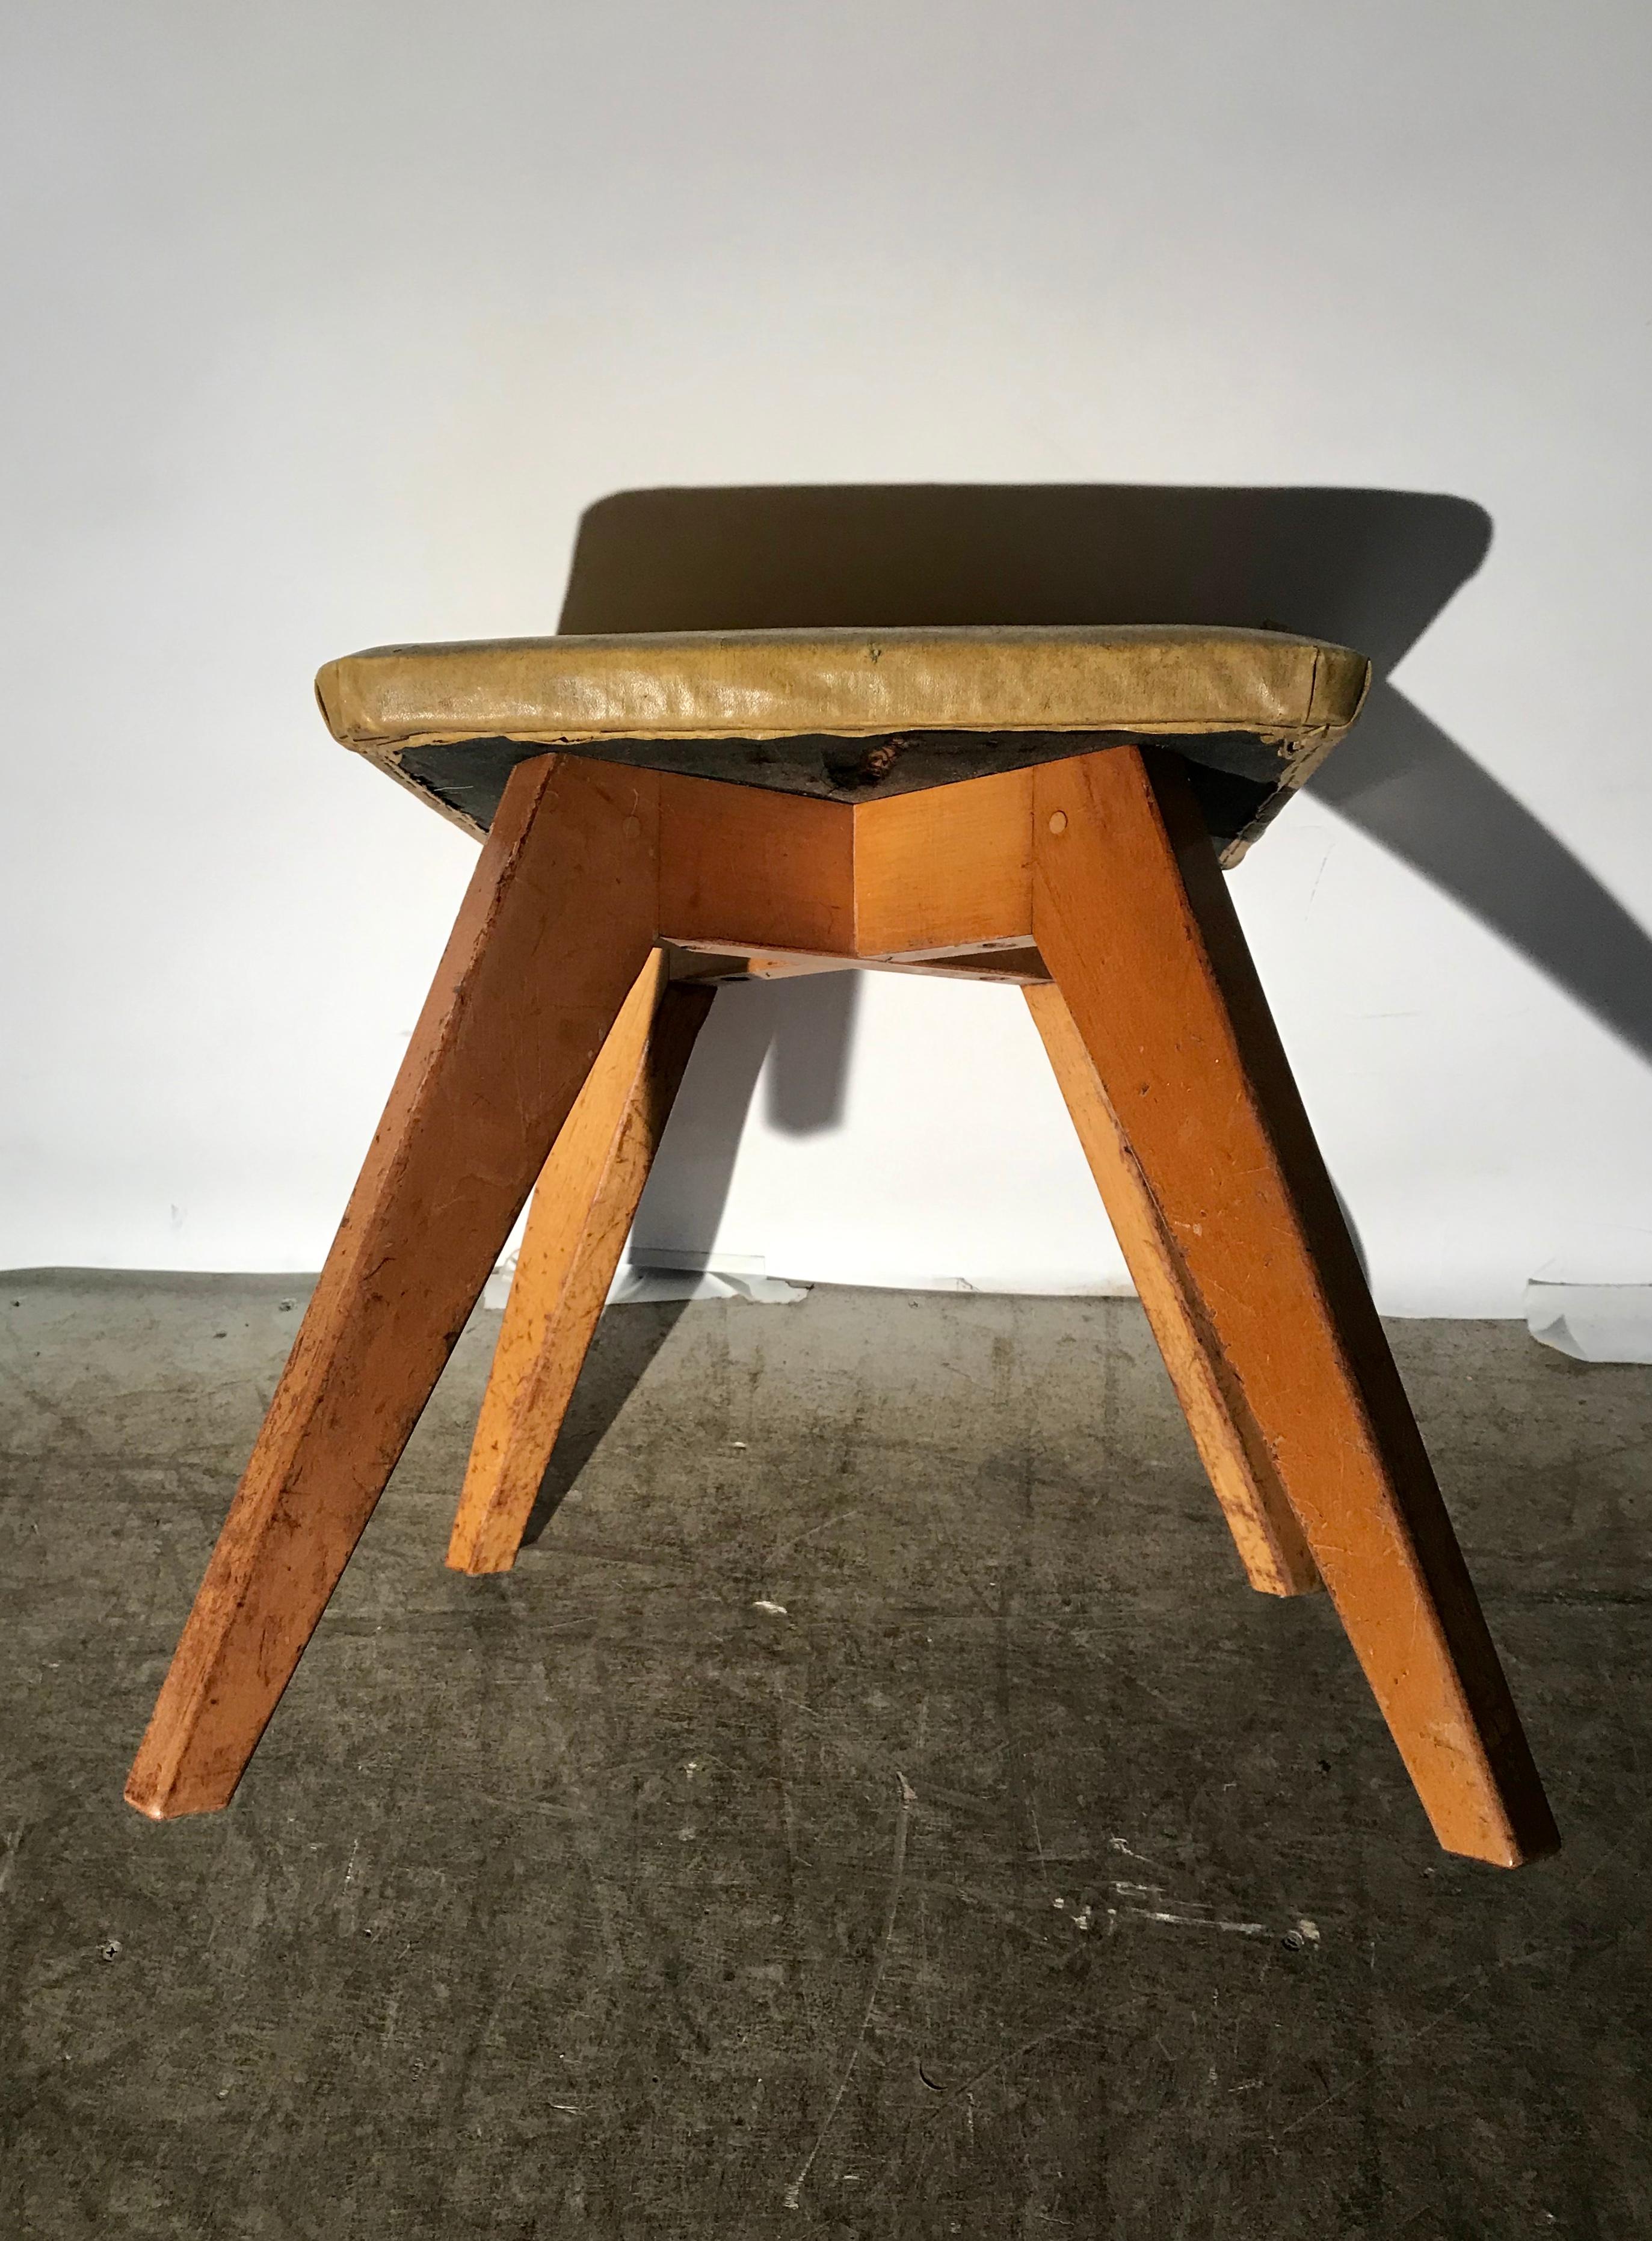 Rare and early Jens Risom stool for Knoll Associates, New York City. Simple, elegant design. Retains original finish as well as original early oil cloth upholstered top. Also original Knoll Associates Label.